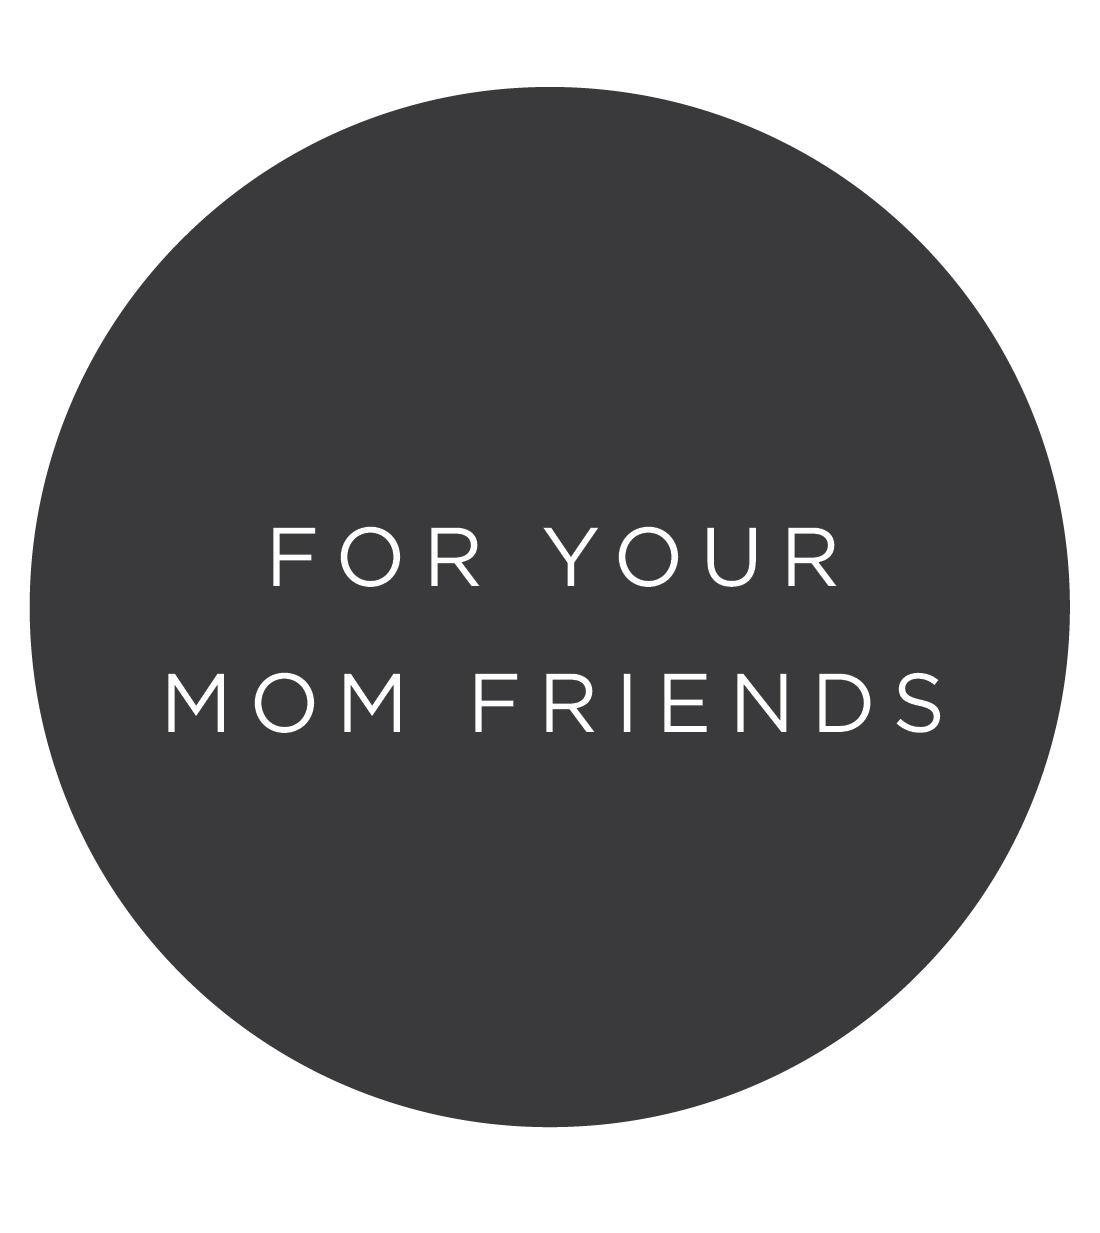 FOR YOUR MOM FRIENDS